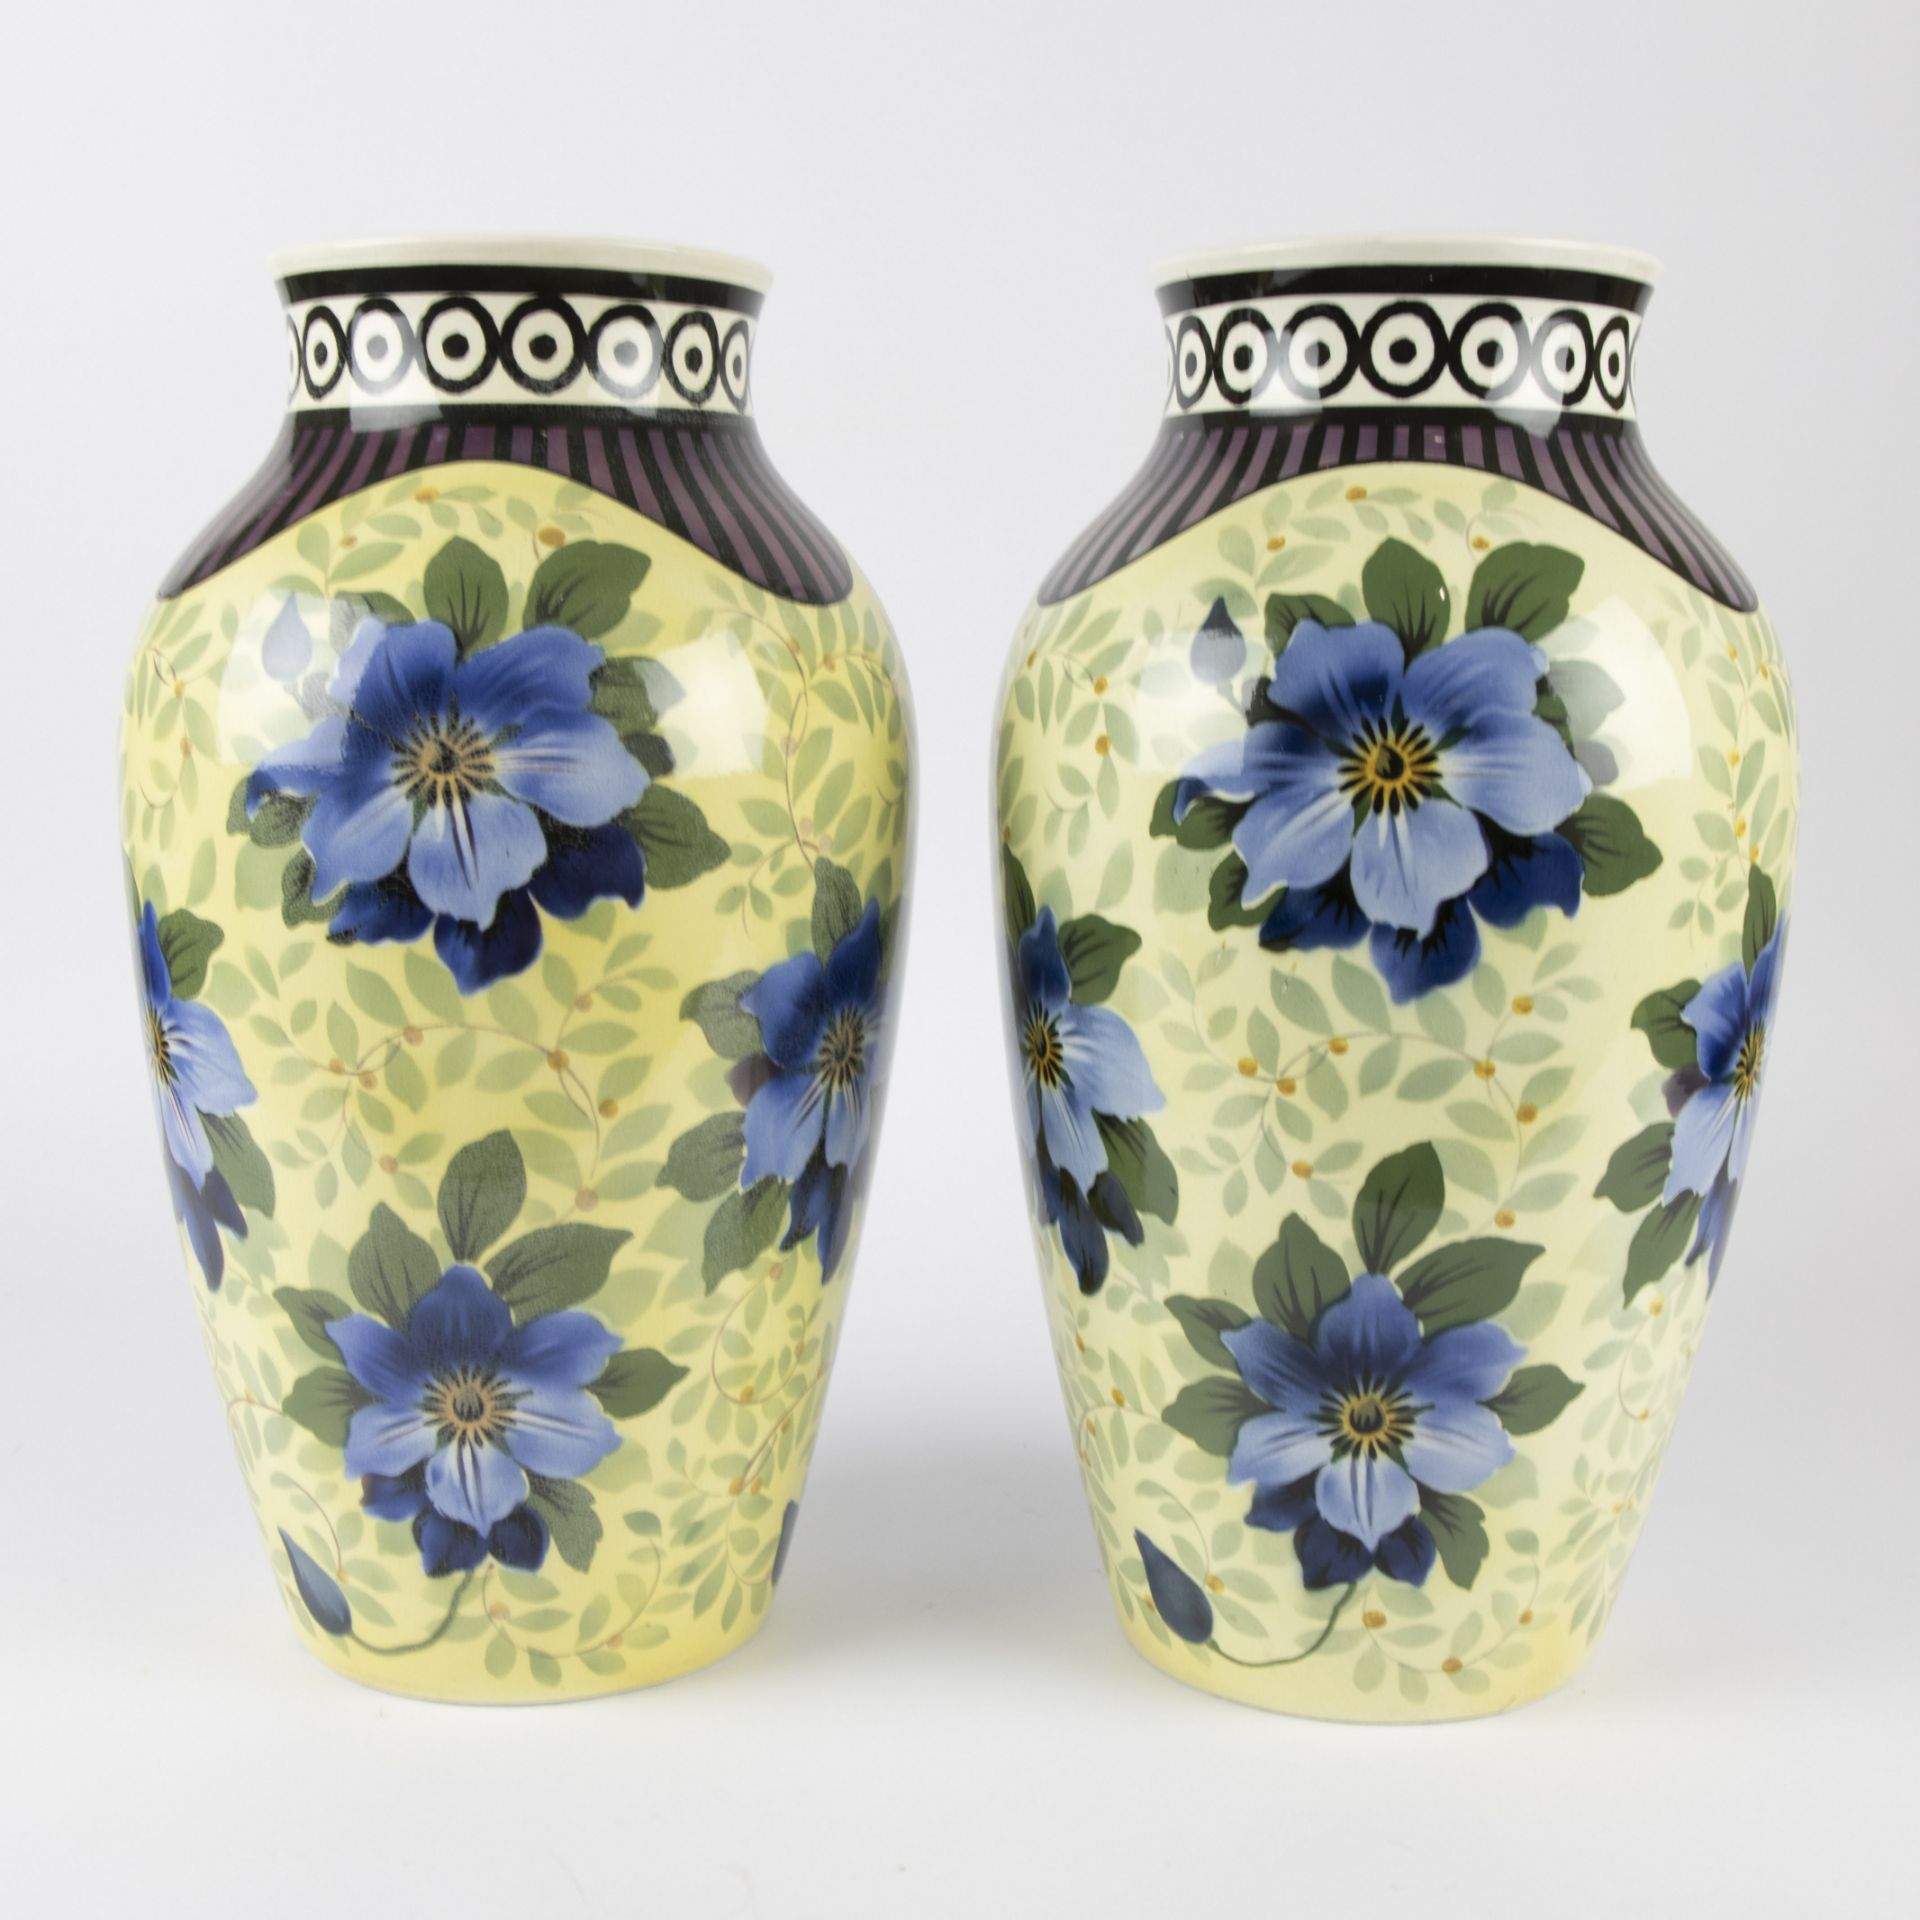 Couple vases marked Villeroy & Boch Wallerfang (1874-1909)